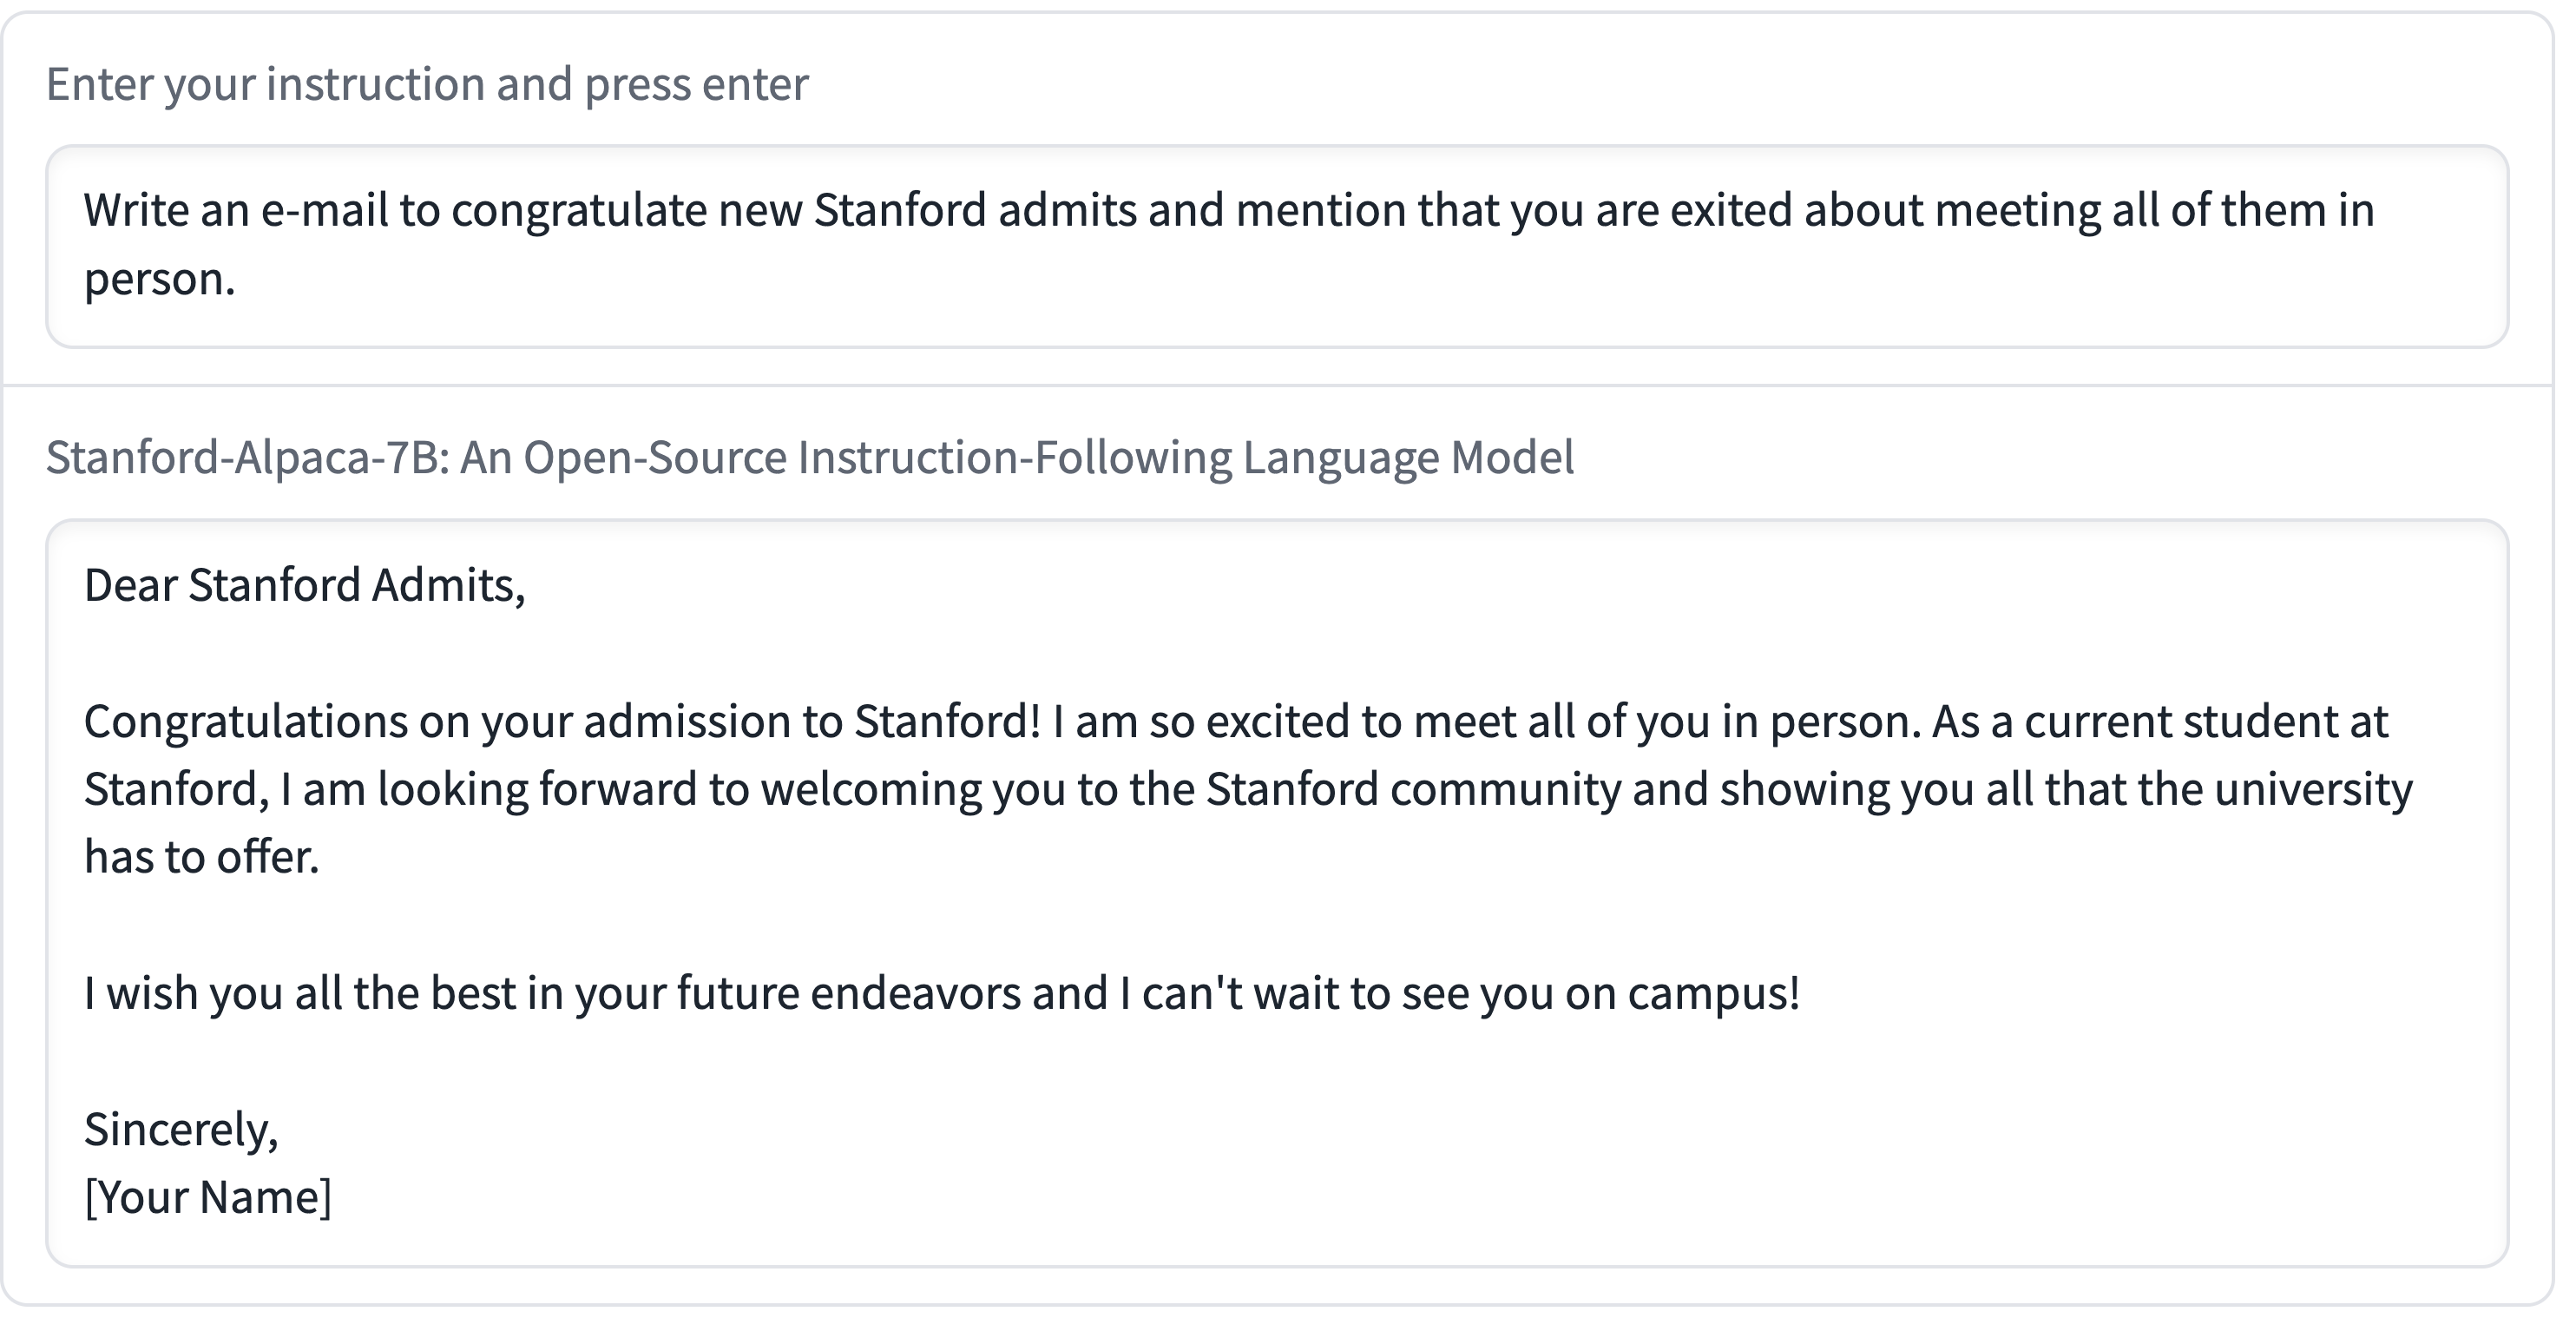 Enter your instruction and press enter: Write an e-mail to congratulate new Stanford admits and mention that you are exited about meeting all of them in person Stanford-Alpaca-7B: An Open-Source Instruction-Following Language Model Dear Stanford Admits, Congratulations on your admission to Stanford! I am so excited to meet all of you in person. As a current student at Stanford, I am looking forward to welcoming you to the Stanford community and showing you all that the university has to offer. I wish you all the best in your future endeavors and I can't wait to see you on campus! Sincerely, Your Name